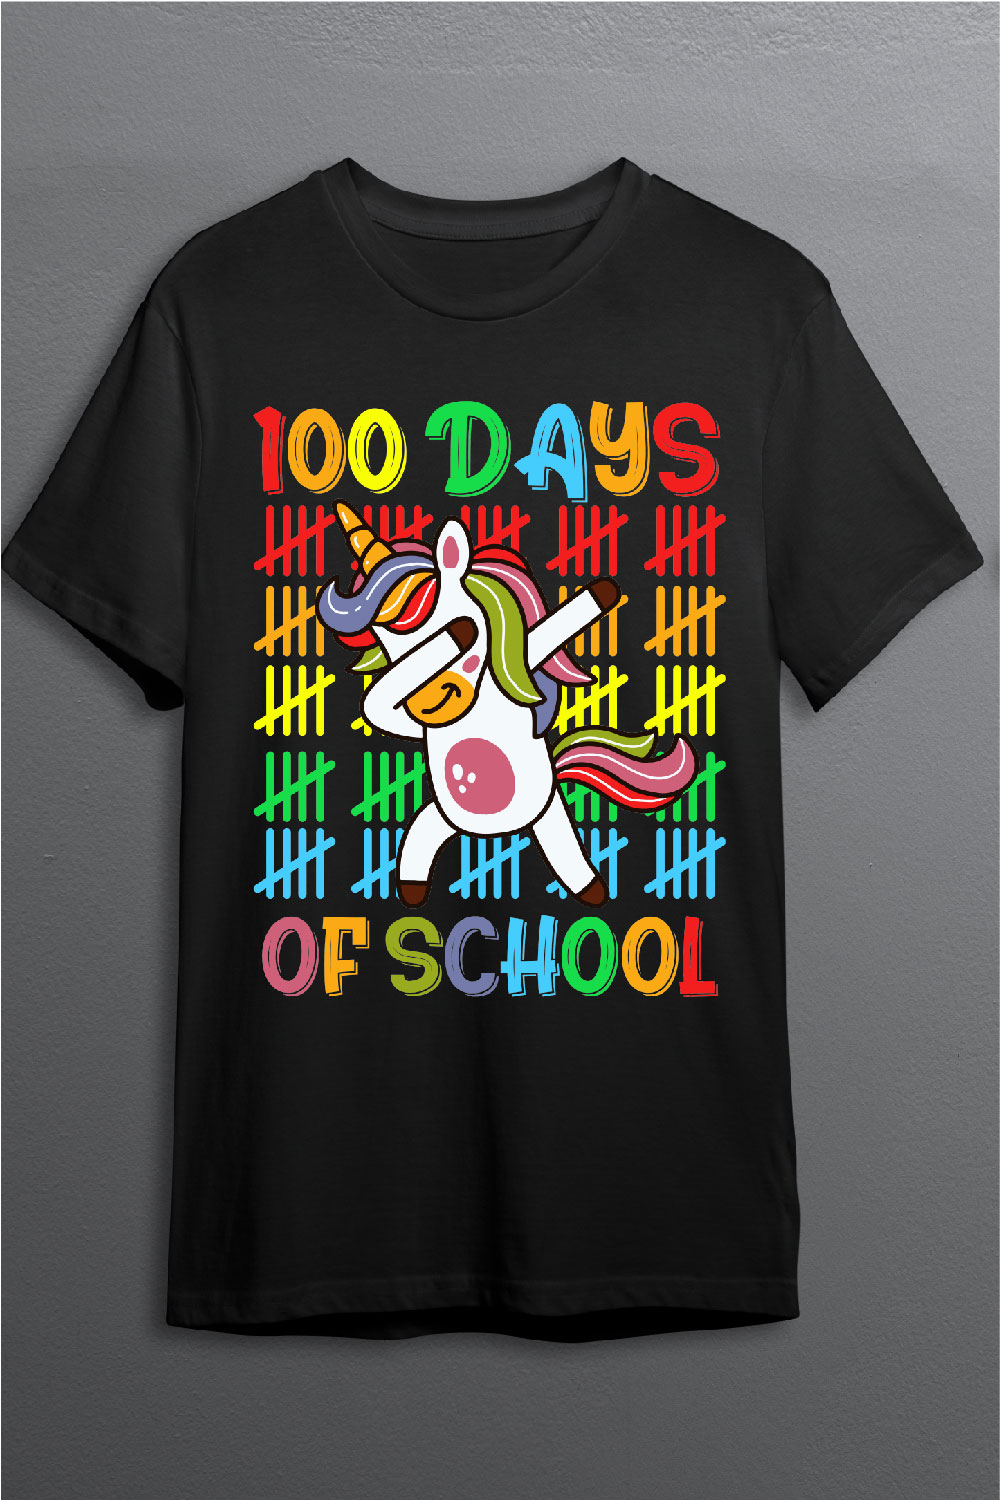 Happy 100 Days of School Unicorn Lover best gift for kids t-shirt pinterest preview image.